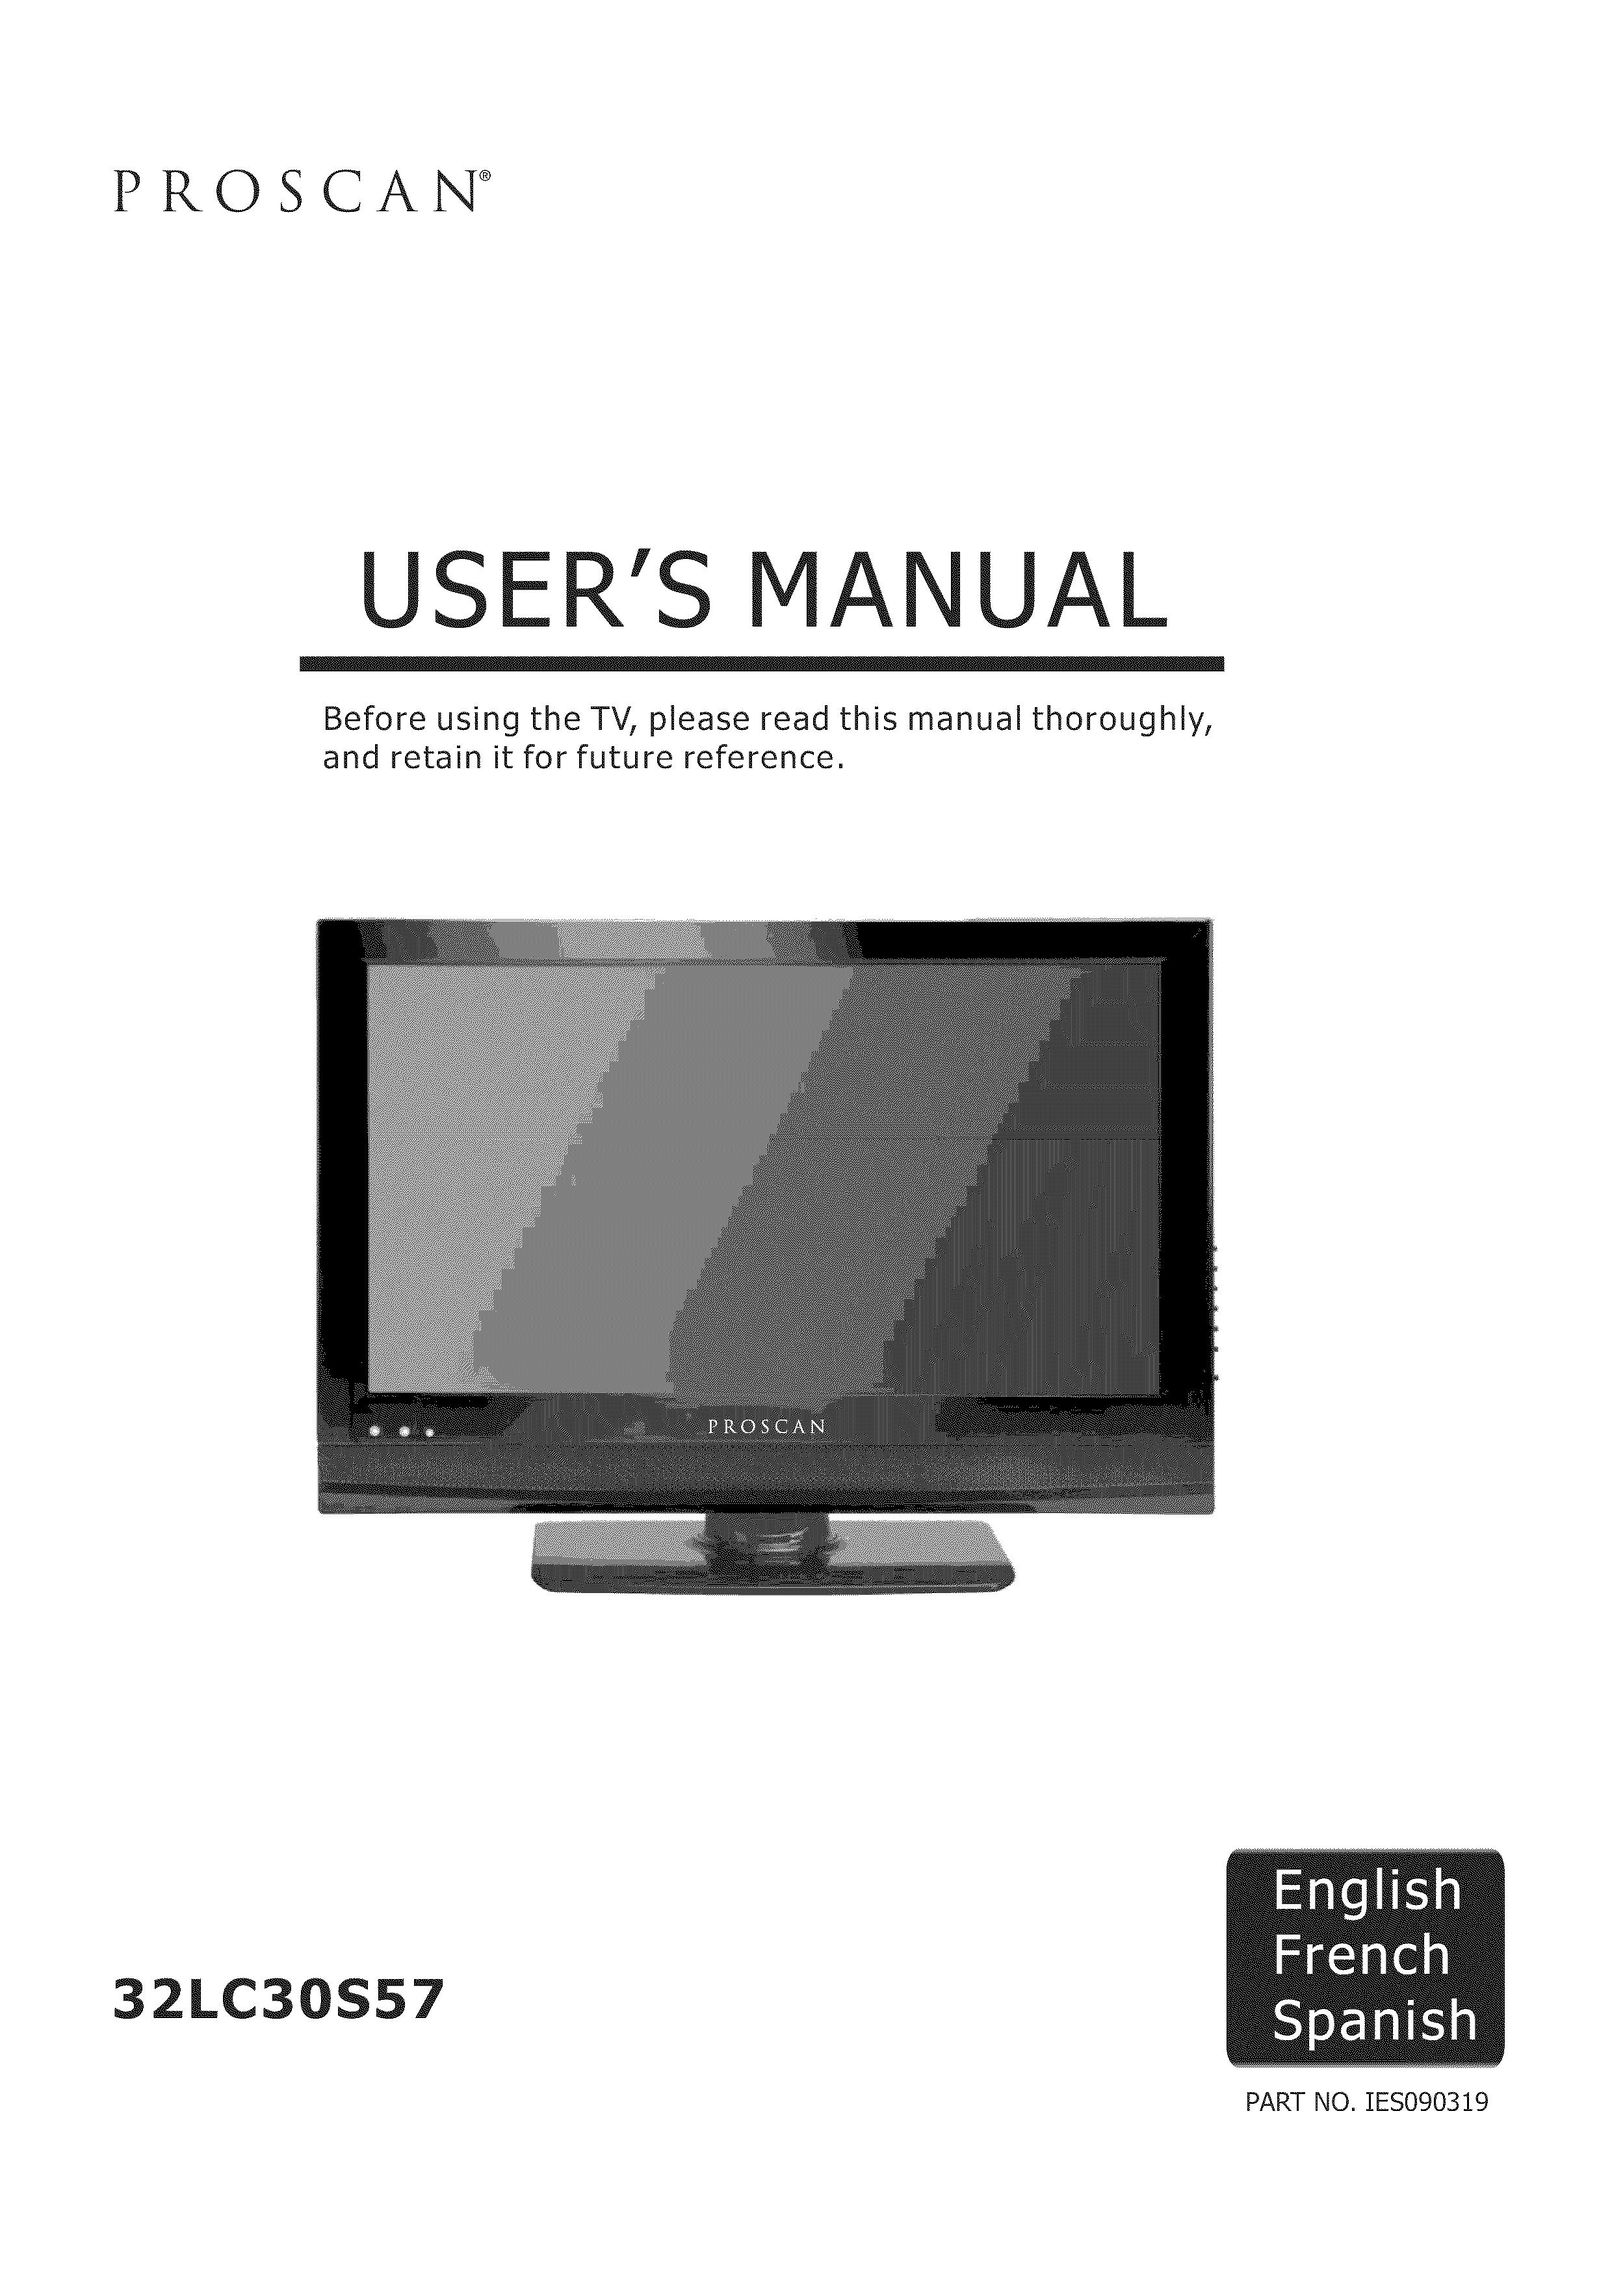 ProScan 32LC30S57 Flat Panel Television User Manual